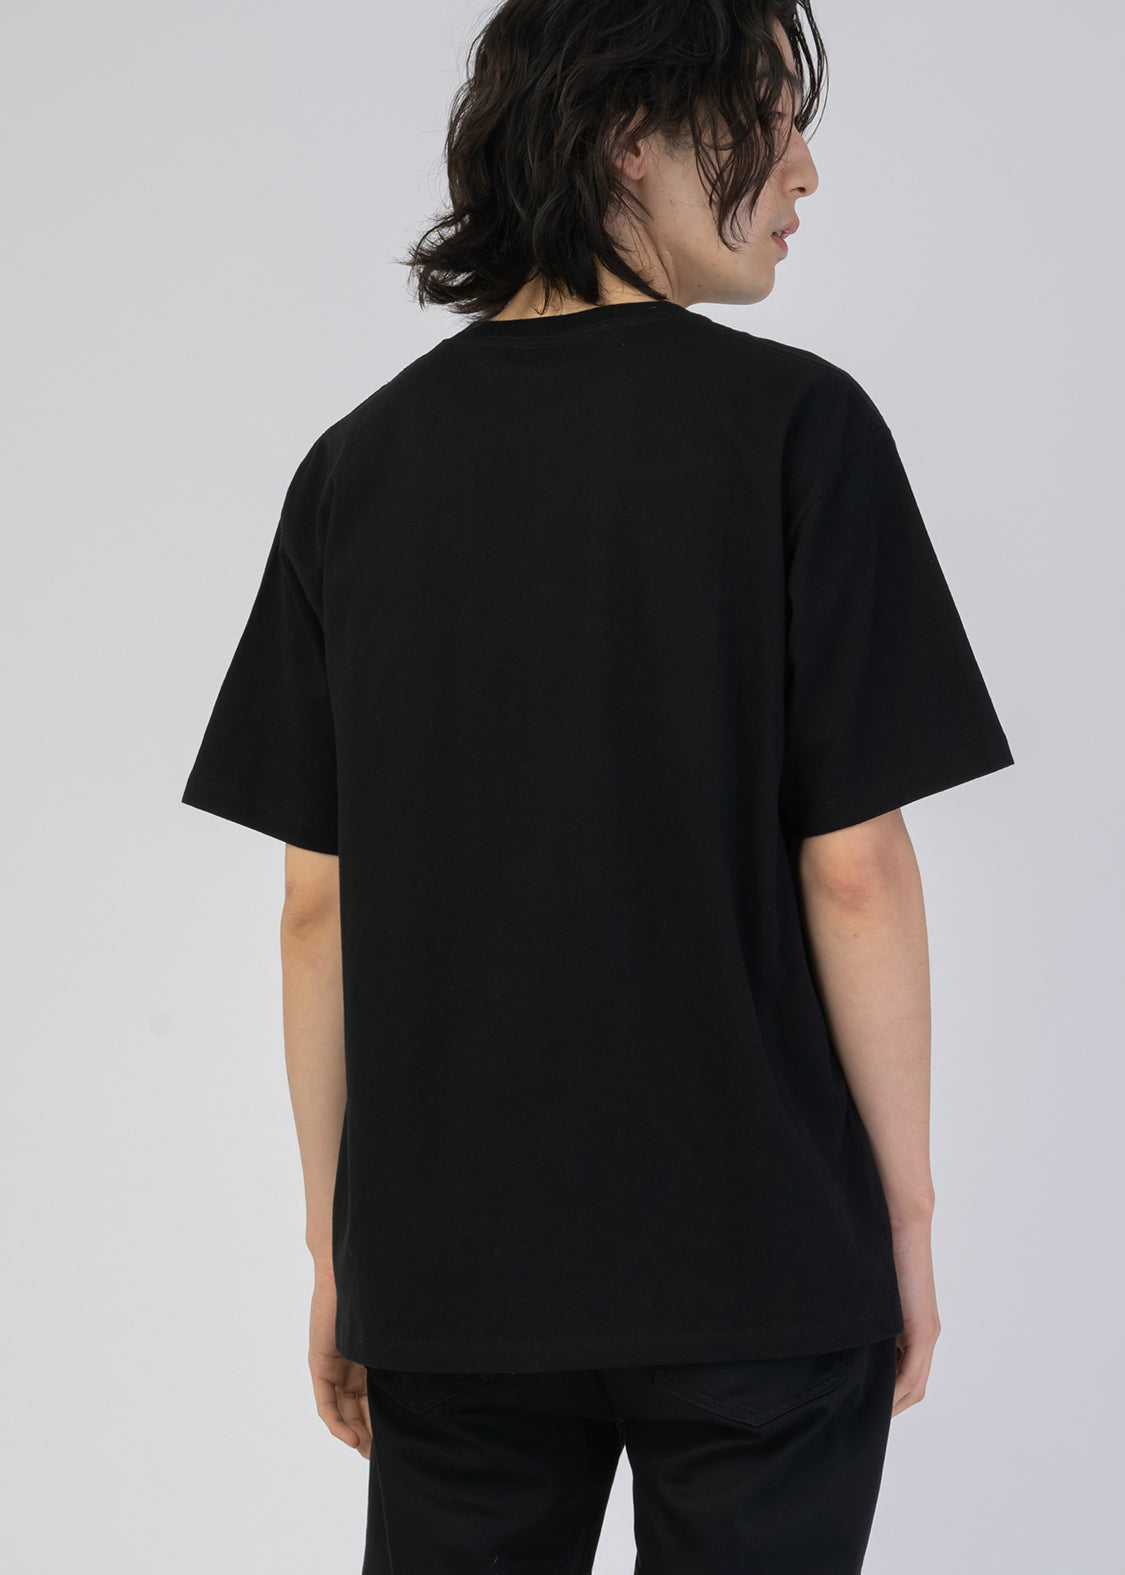 Embroidery Short Sleeve Tee (Solid Universe)